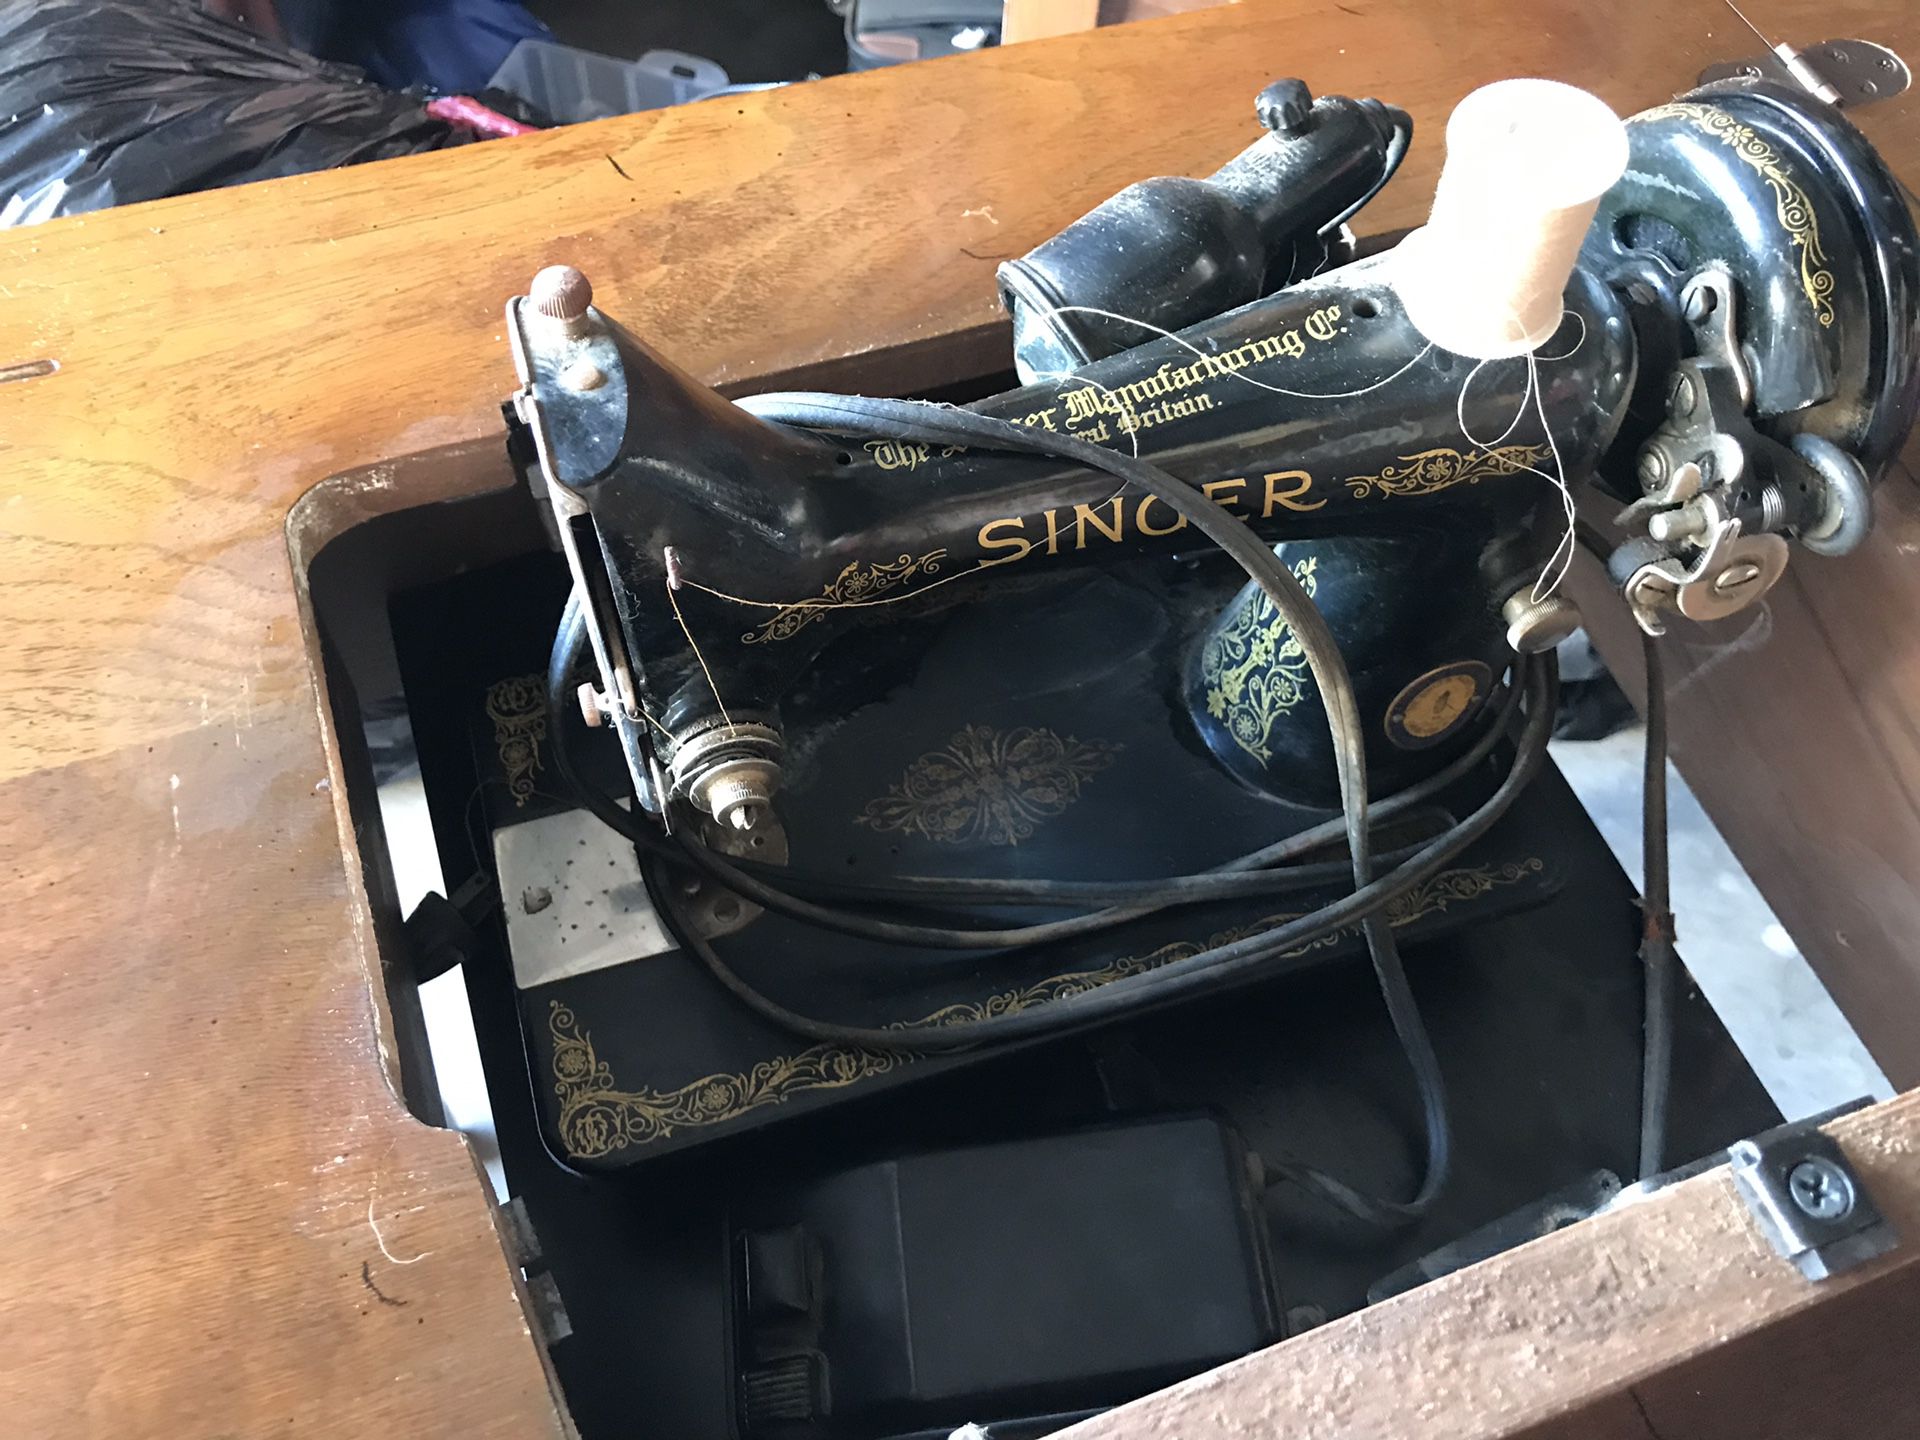 Antique singer sewing machine beautiful machine, last I checked it worked and I have bobbins and such for it.